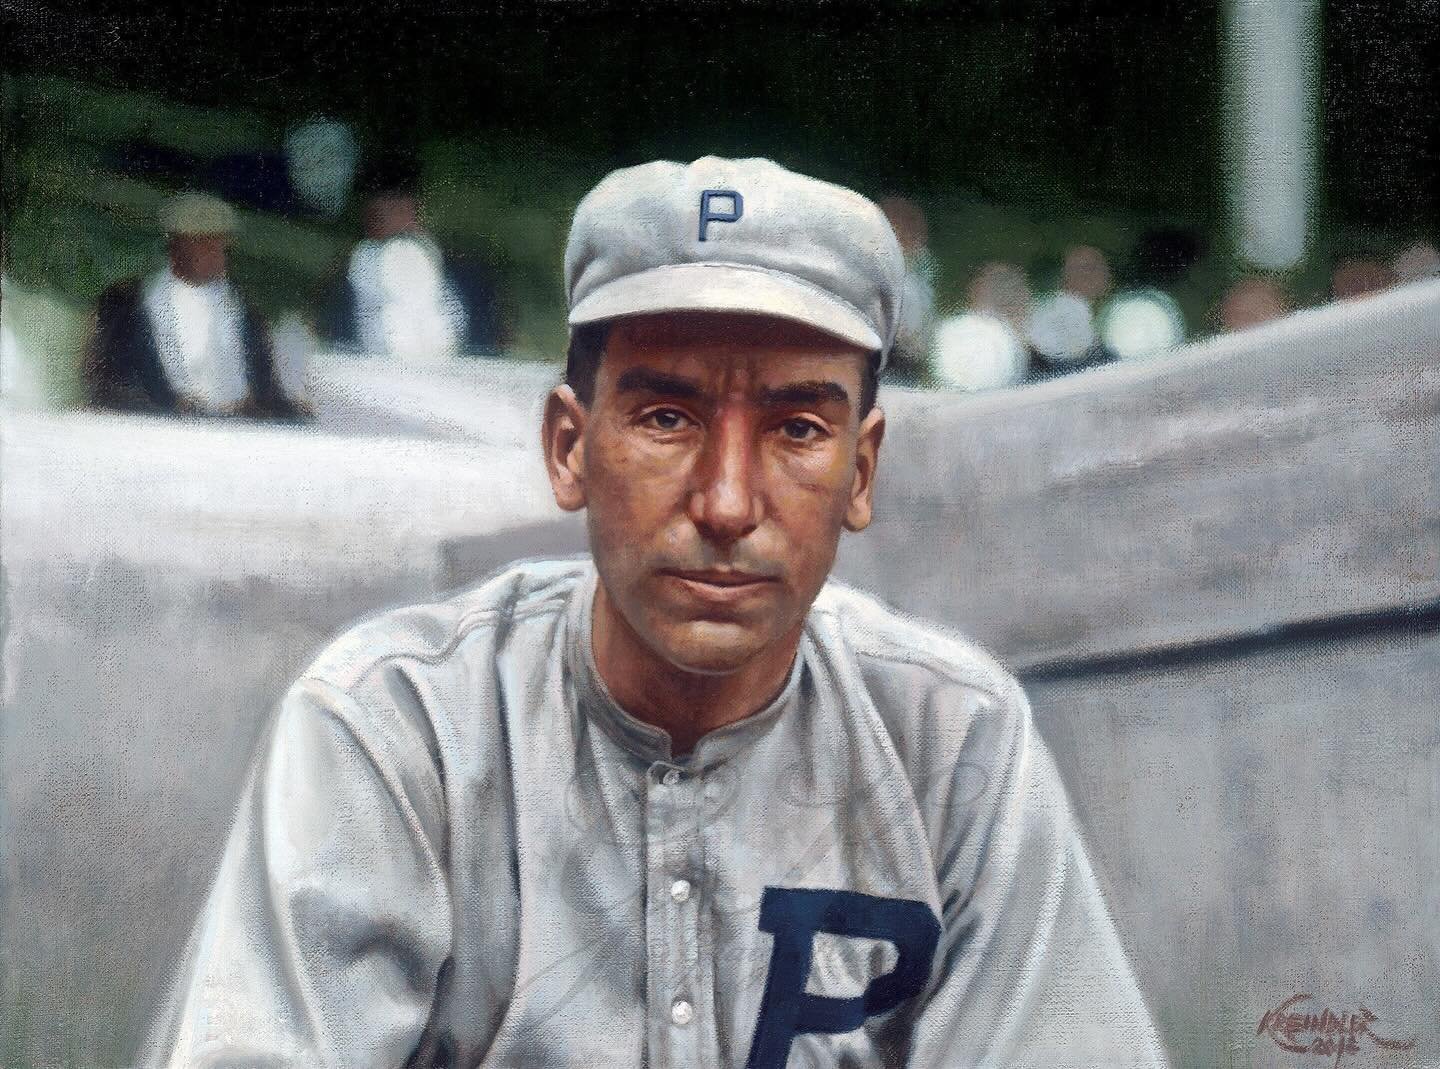 On this day in 1891, Eppa Rixey was born in Culpeper, VA. Often forgotten today, his total of 266 wins was the National League record for lefthanders until some guy named Spahn came along. Here&rsquo;s my painting of him with the Phillies in 1912, ba